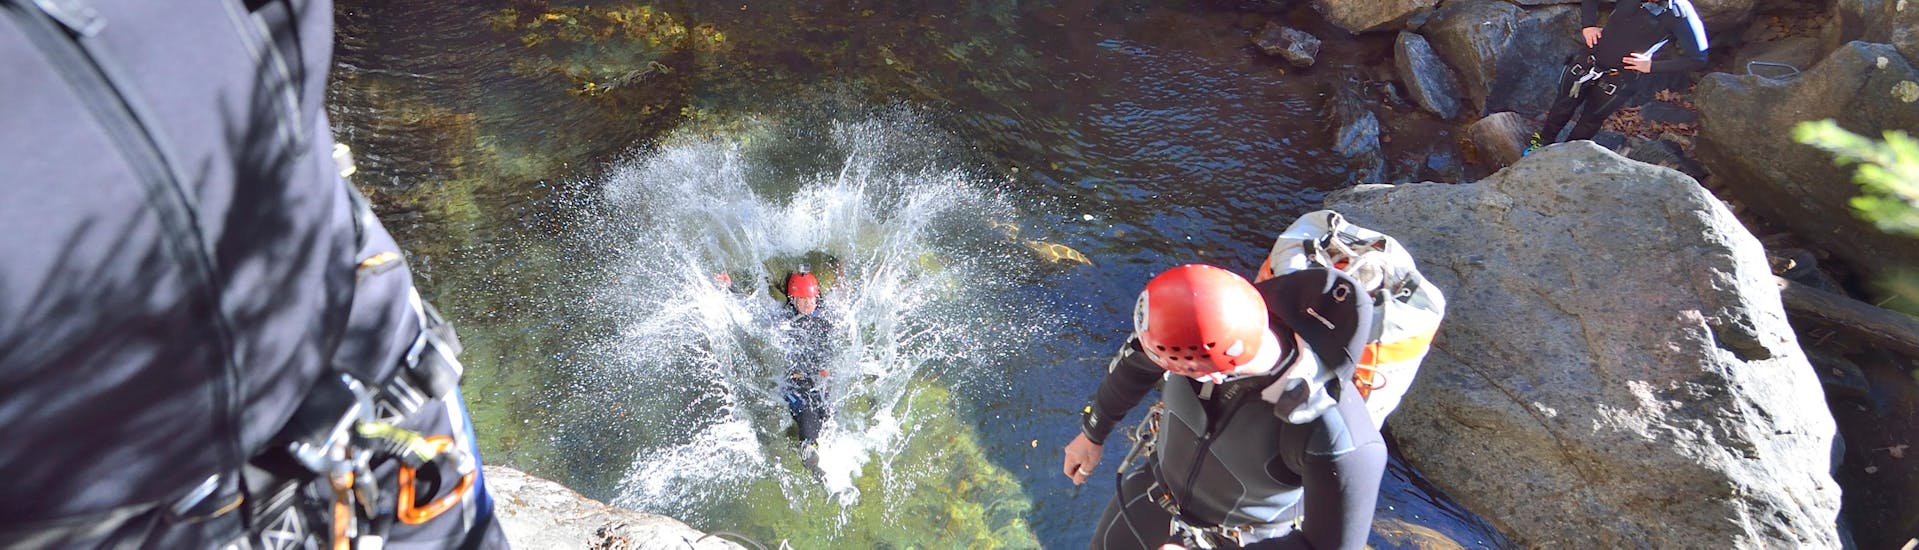 A woman landing in the water while Canyoning near Ried im Oberinntal - Pure Action with H2O Adventure Ried.